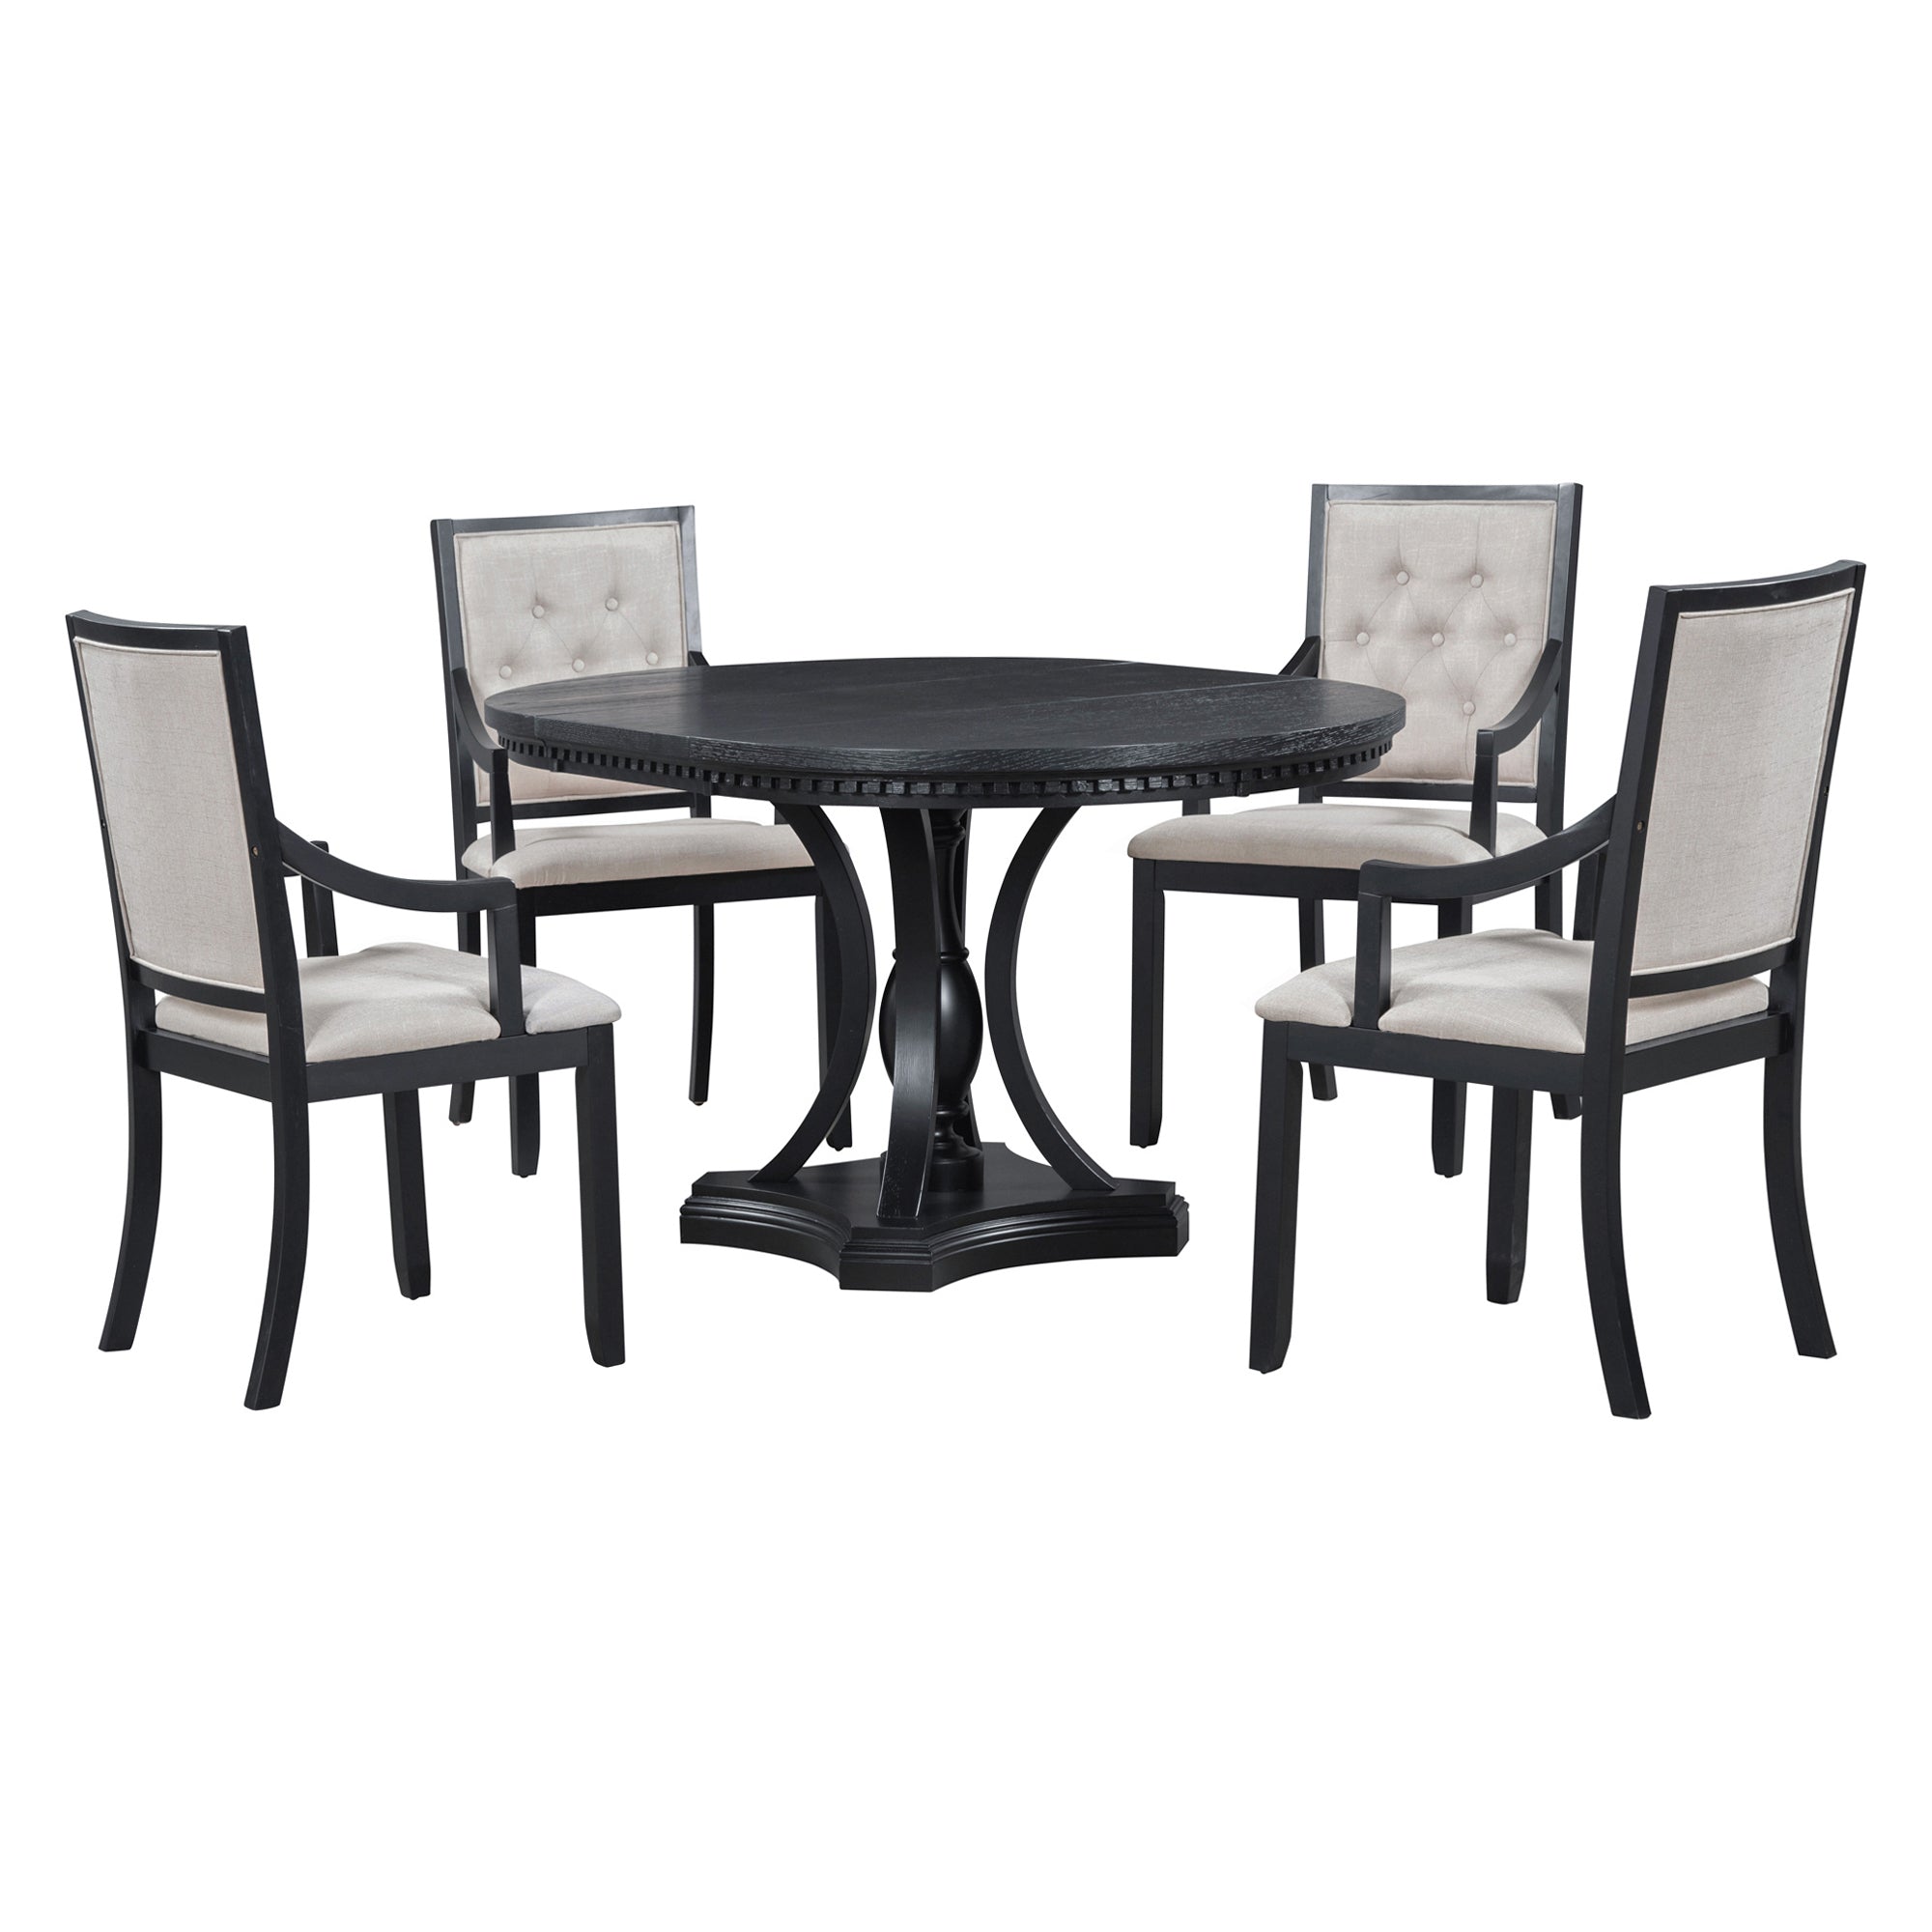 5-piece Dining Set Extendable Round Table and 4 Chairs for Kitchen Dining Room - Black Oak